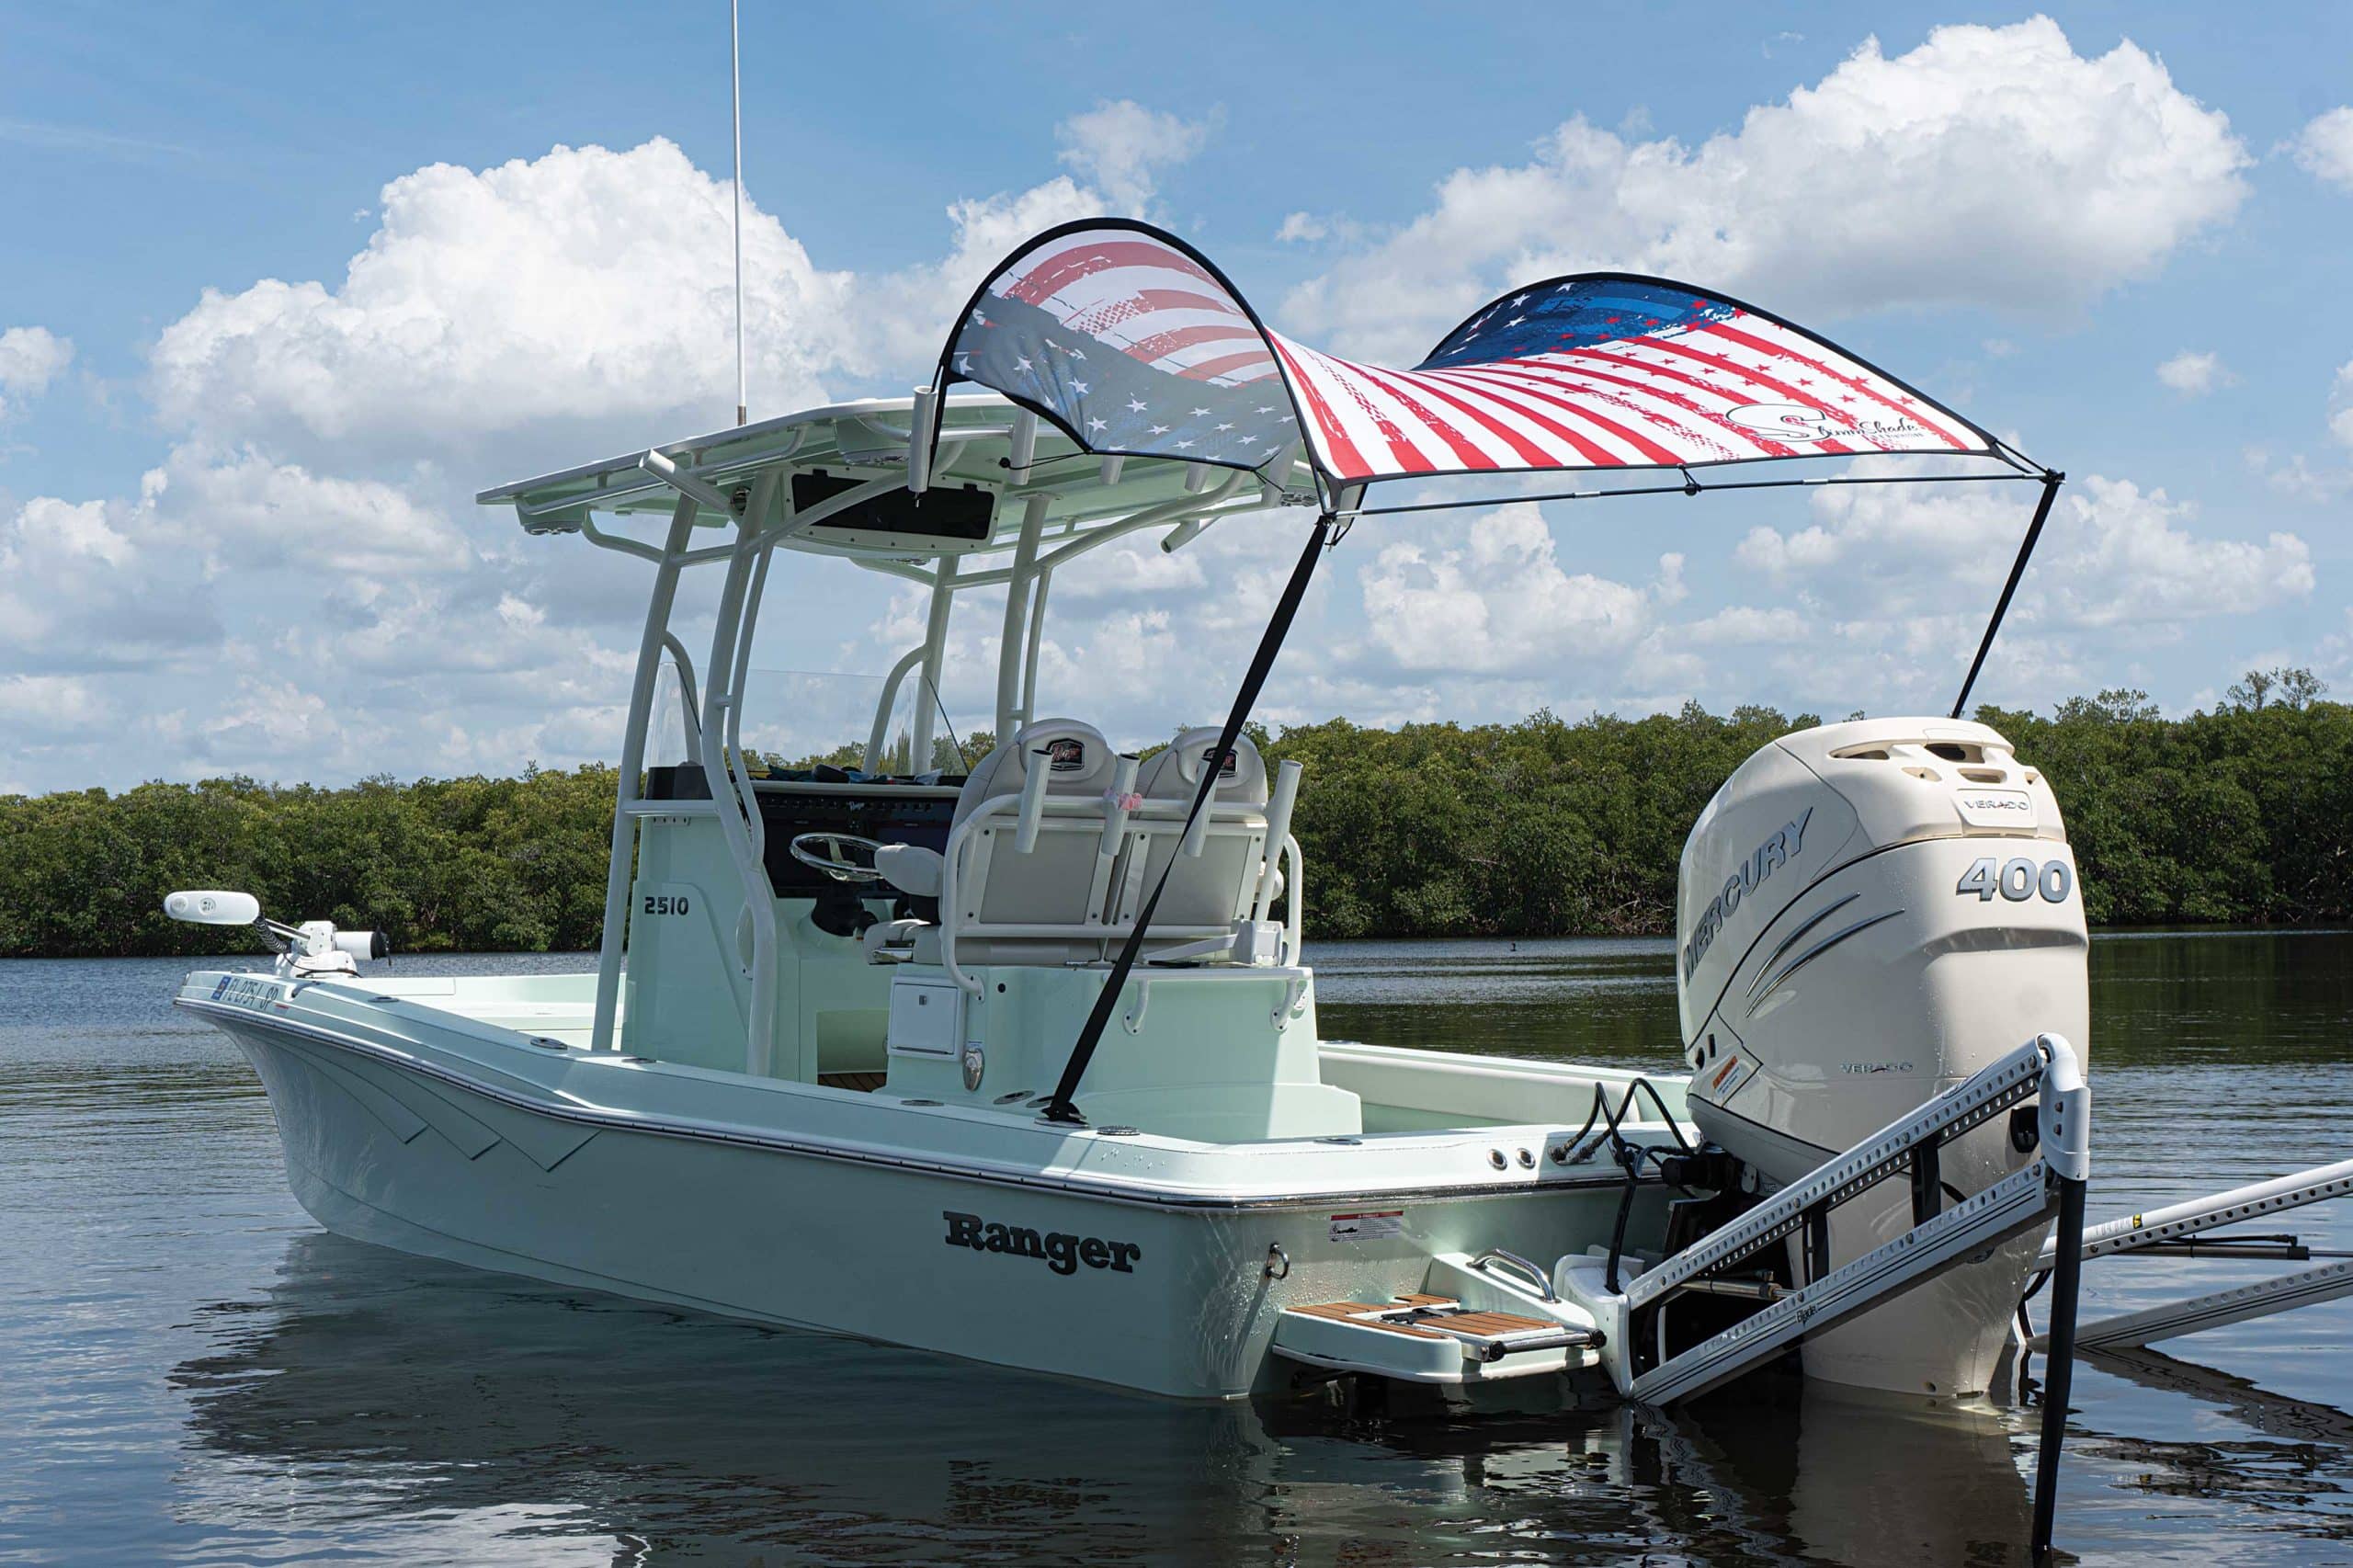 Adding a Sun Shade to Your Boat